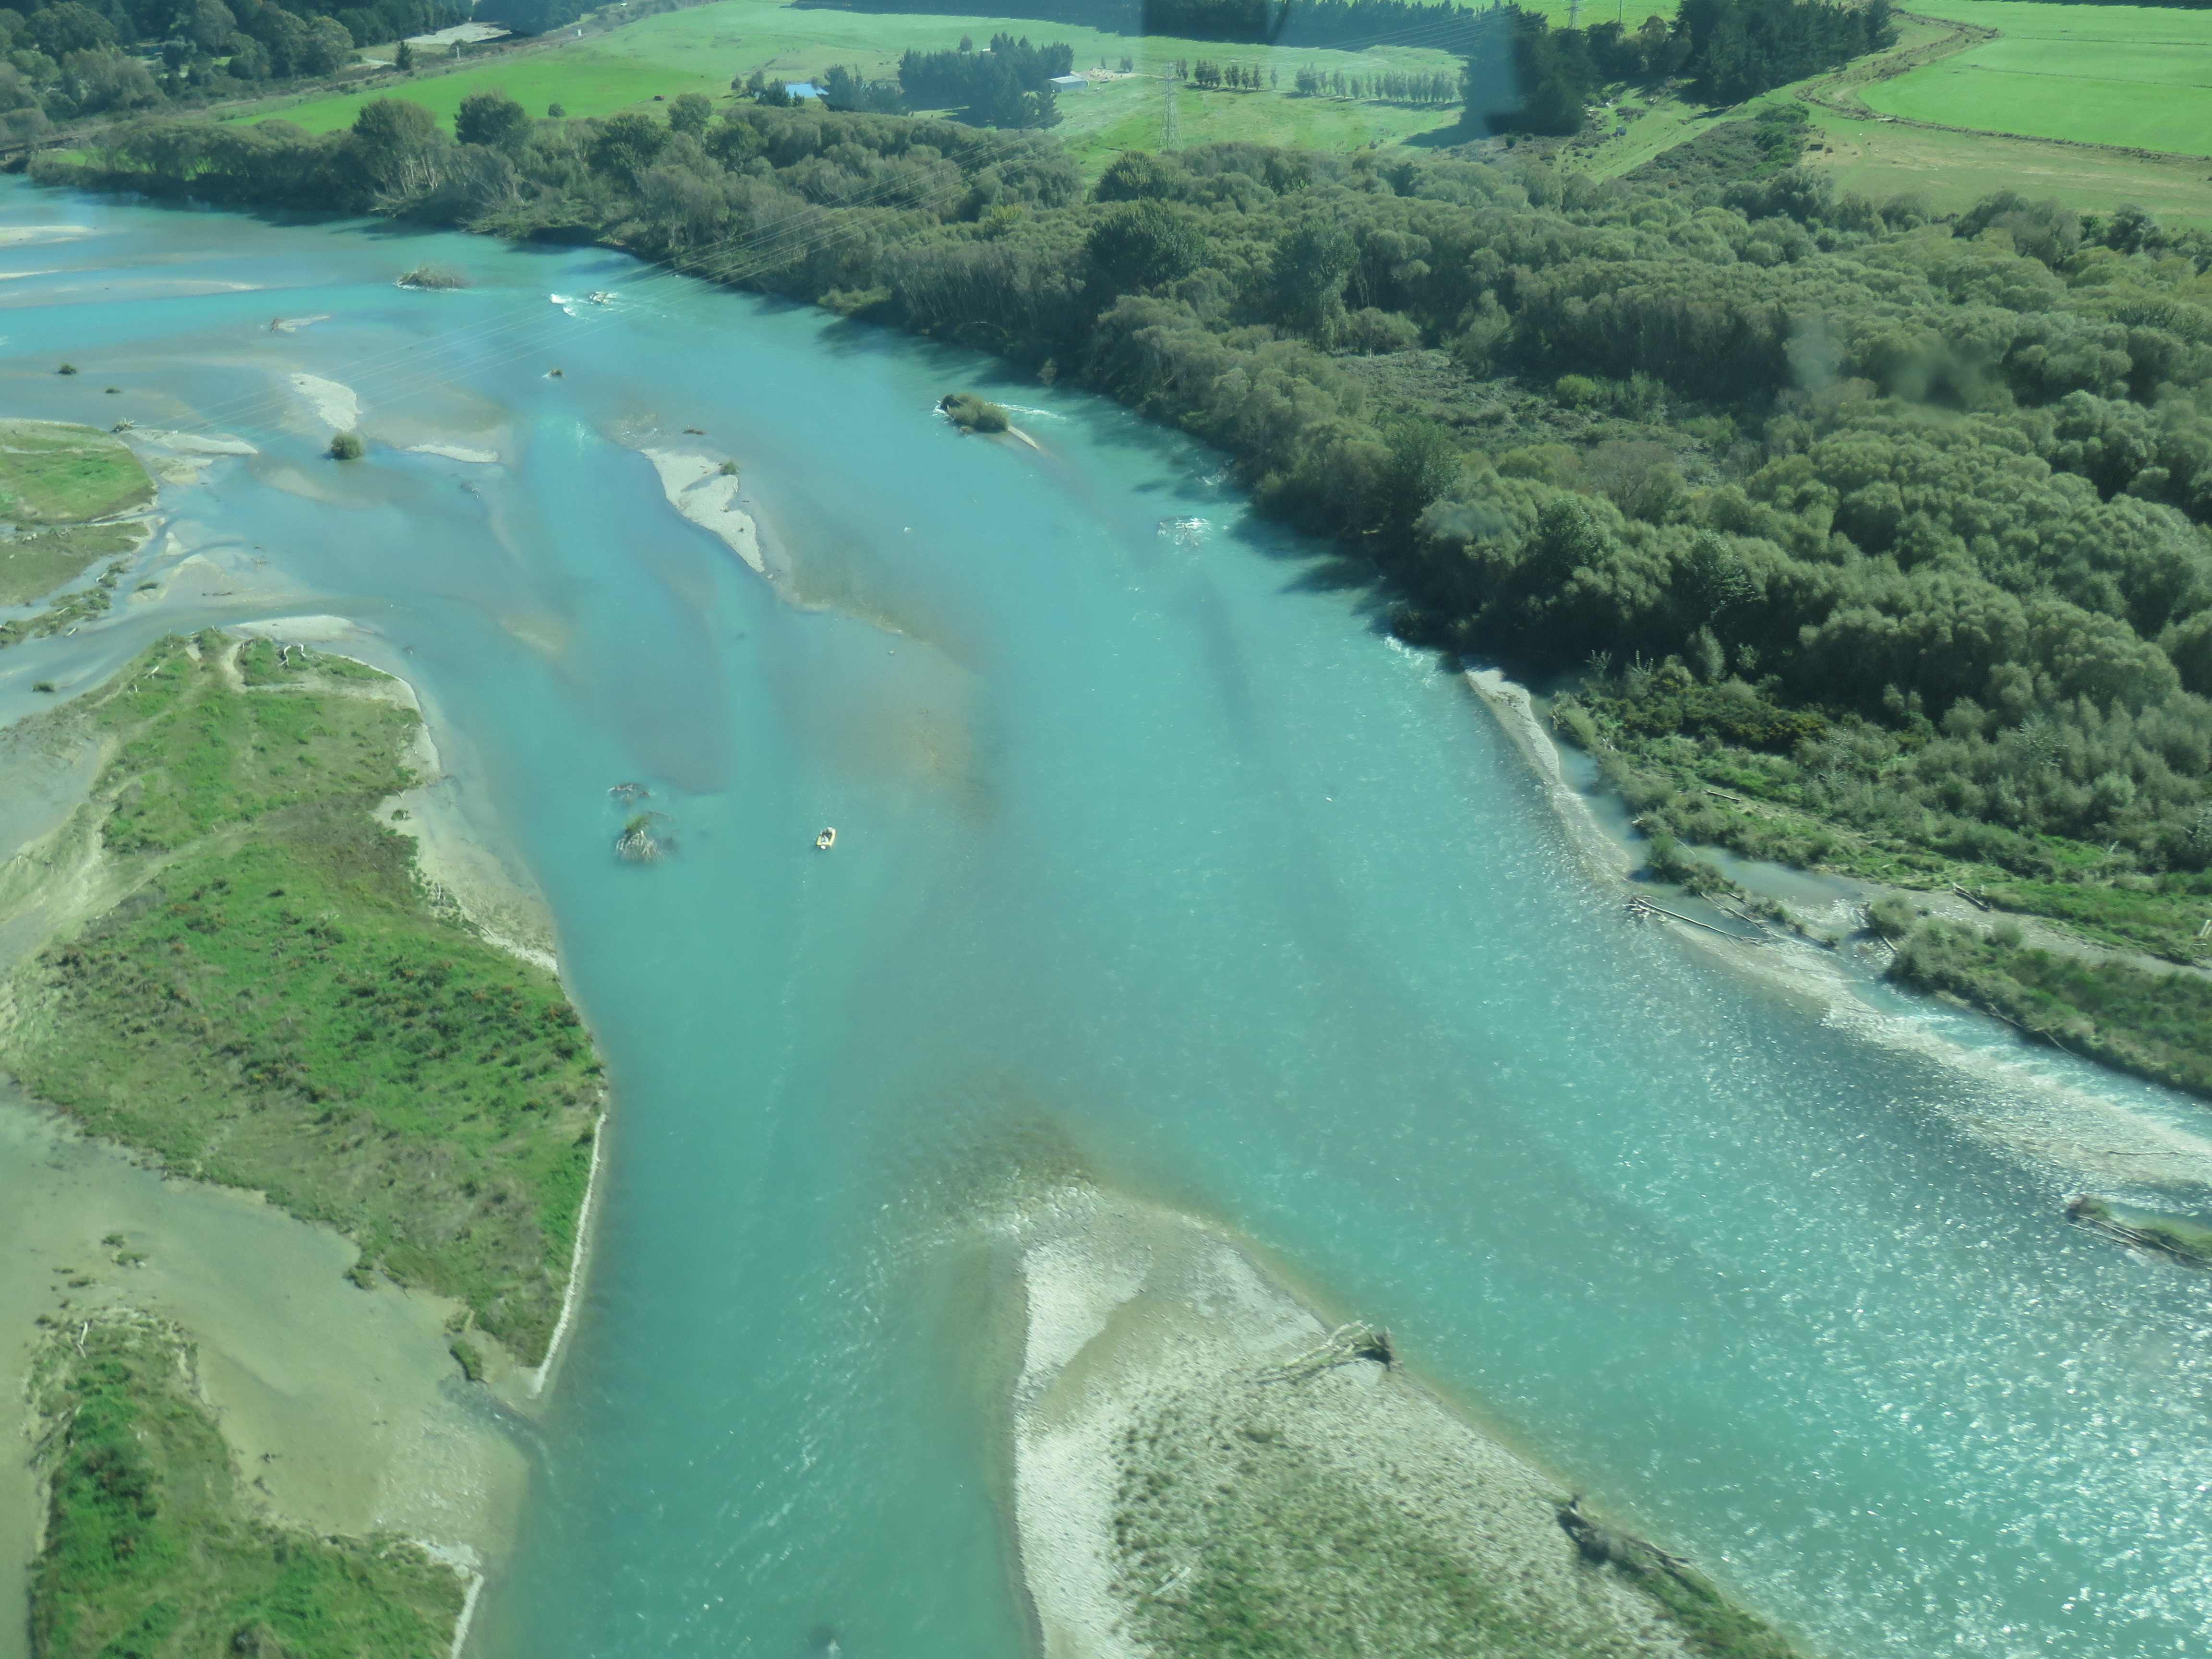 WFR1718.48The Lower Waitaki River flowing at around 350 Cumecs on 14 03 18